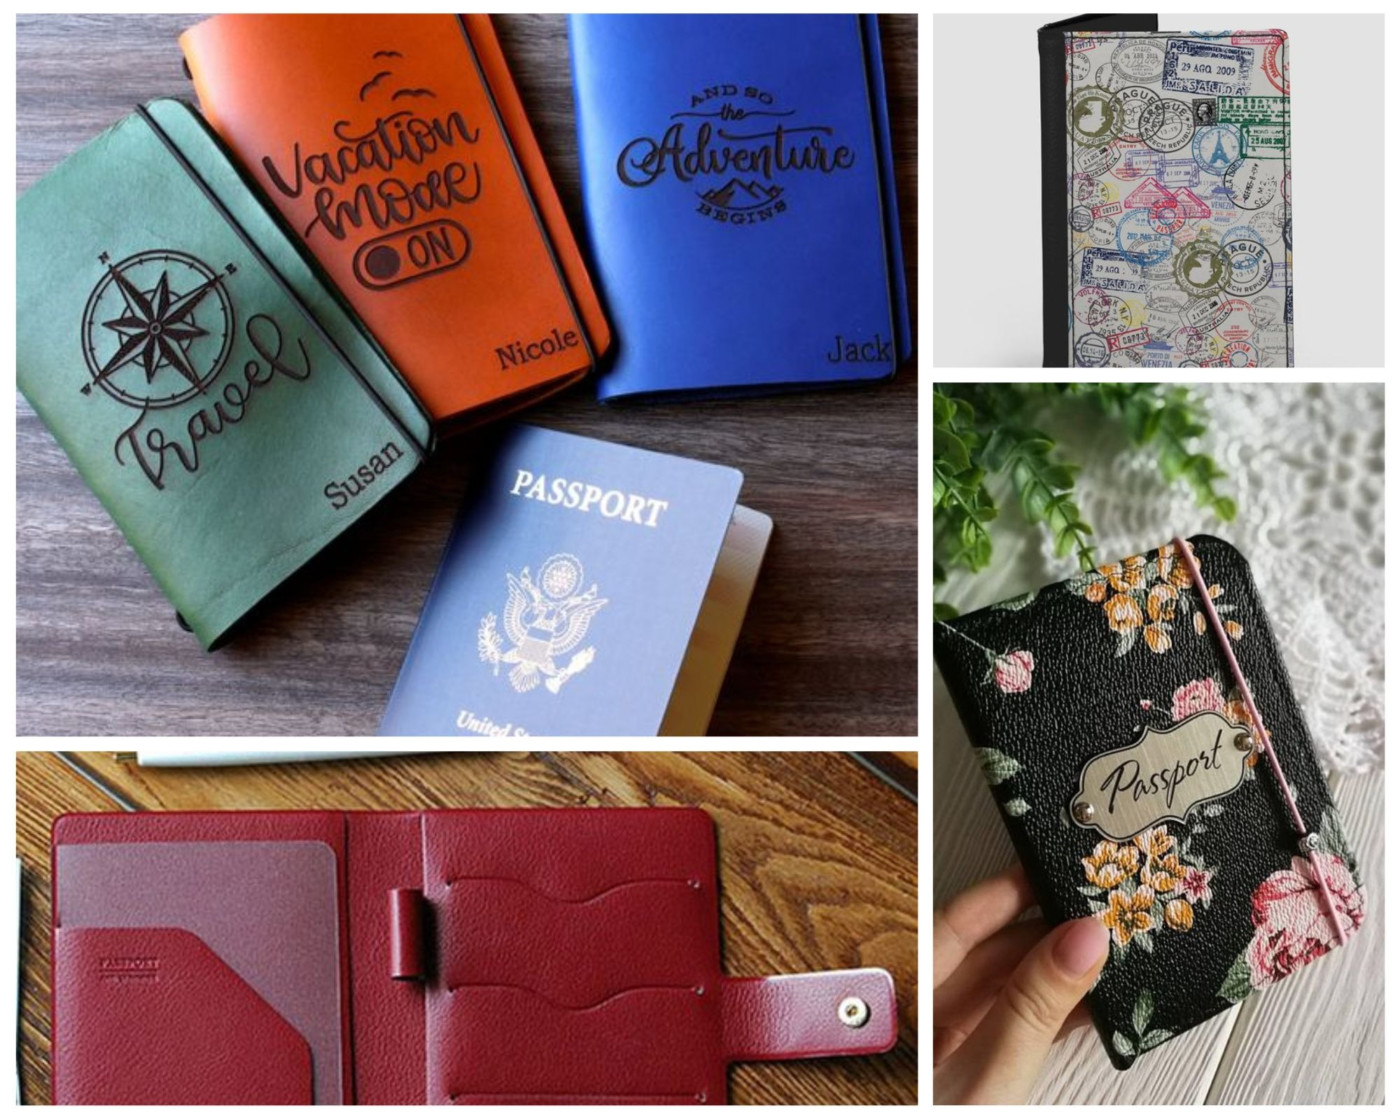 the image shows many passport covers with different colors and materials and even floral designs.